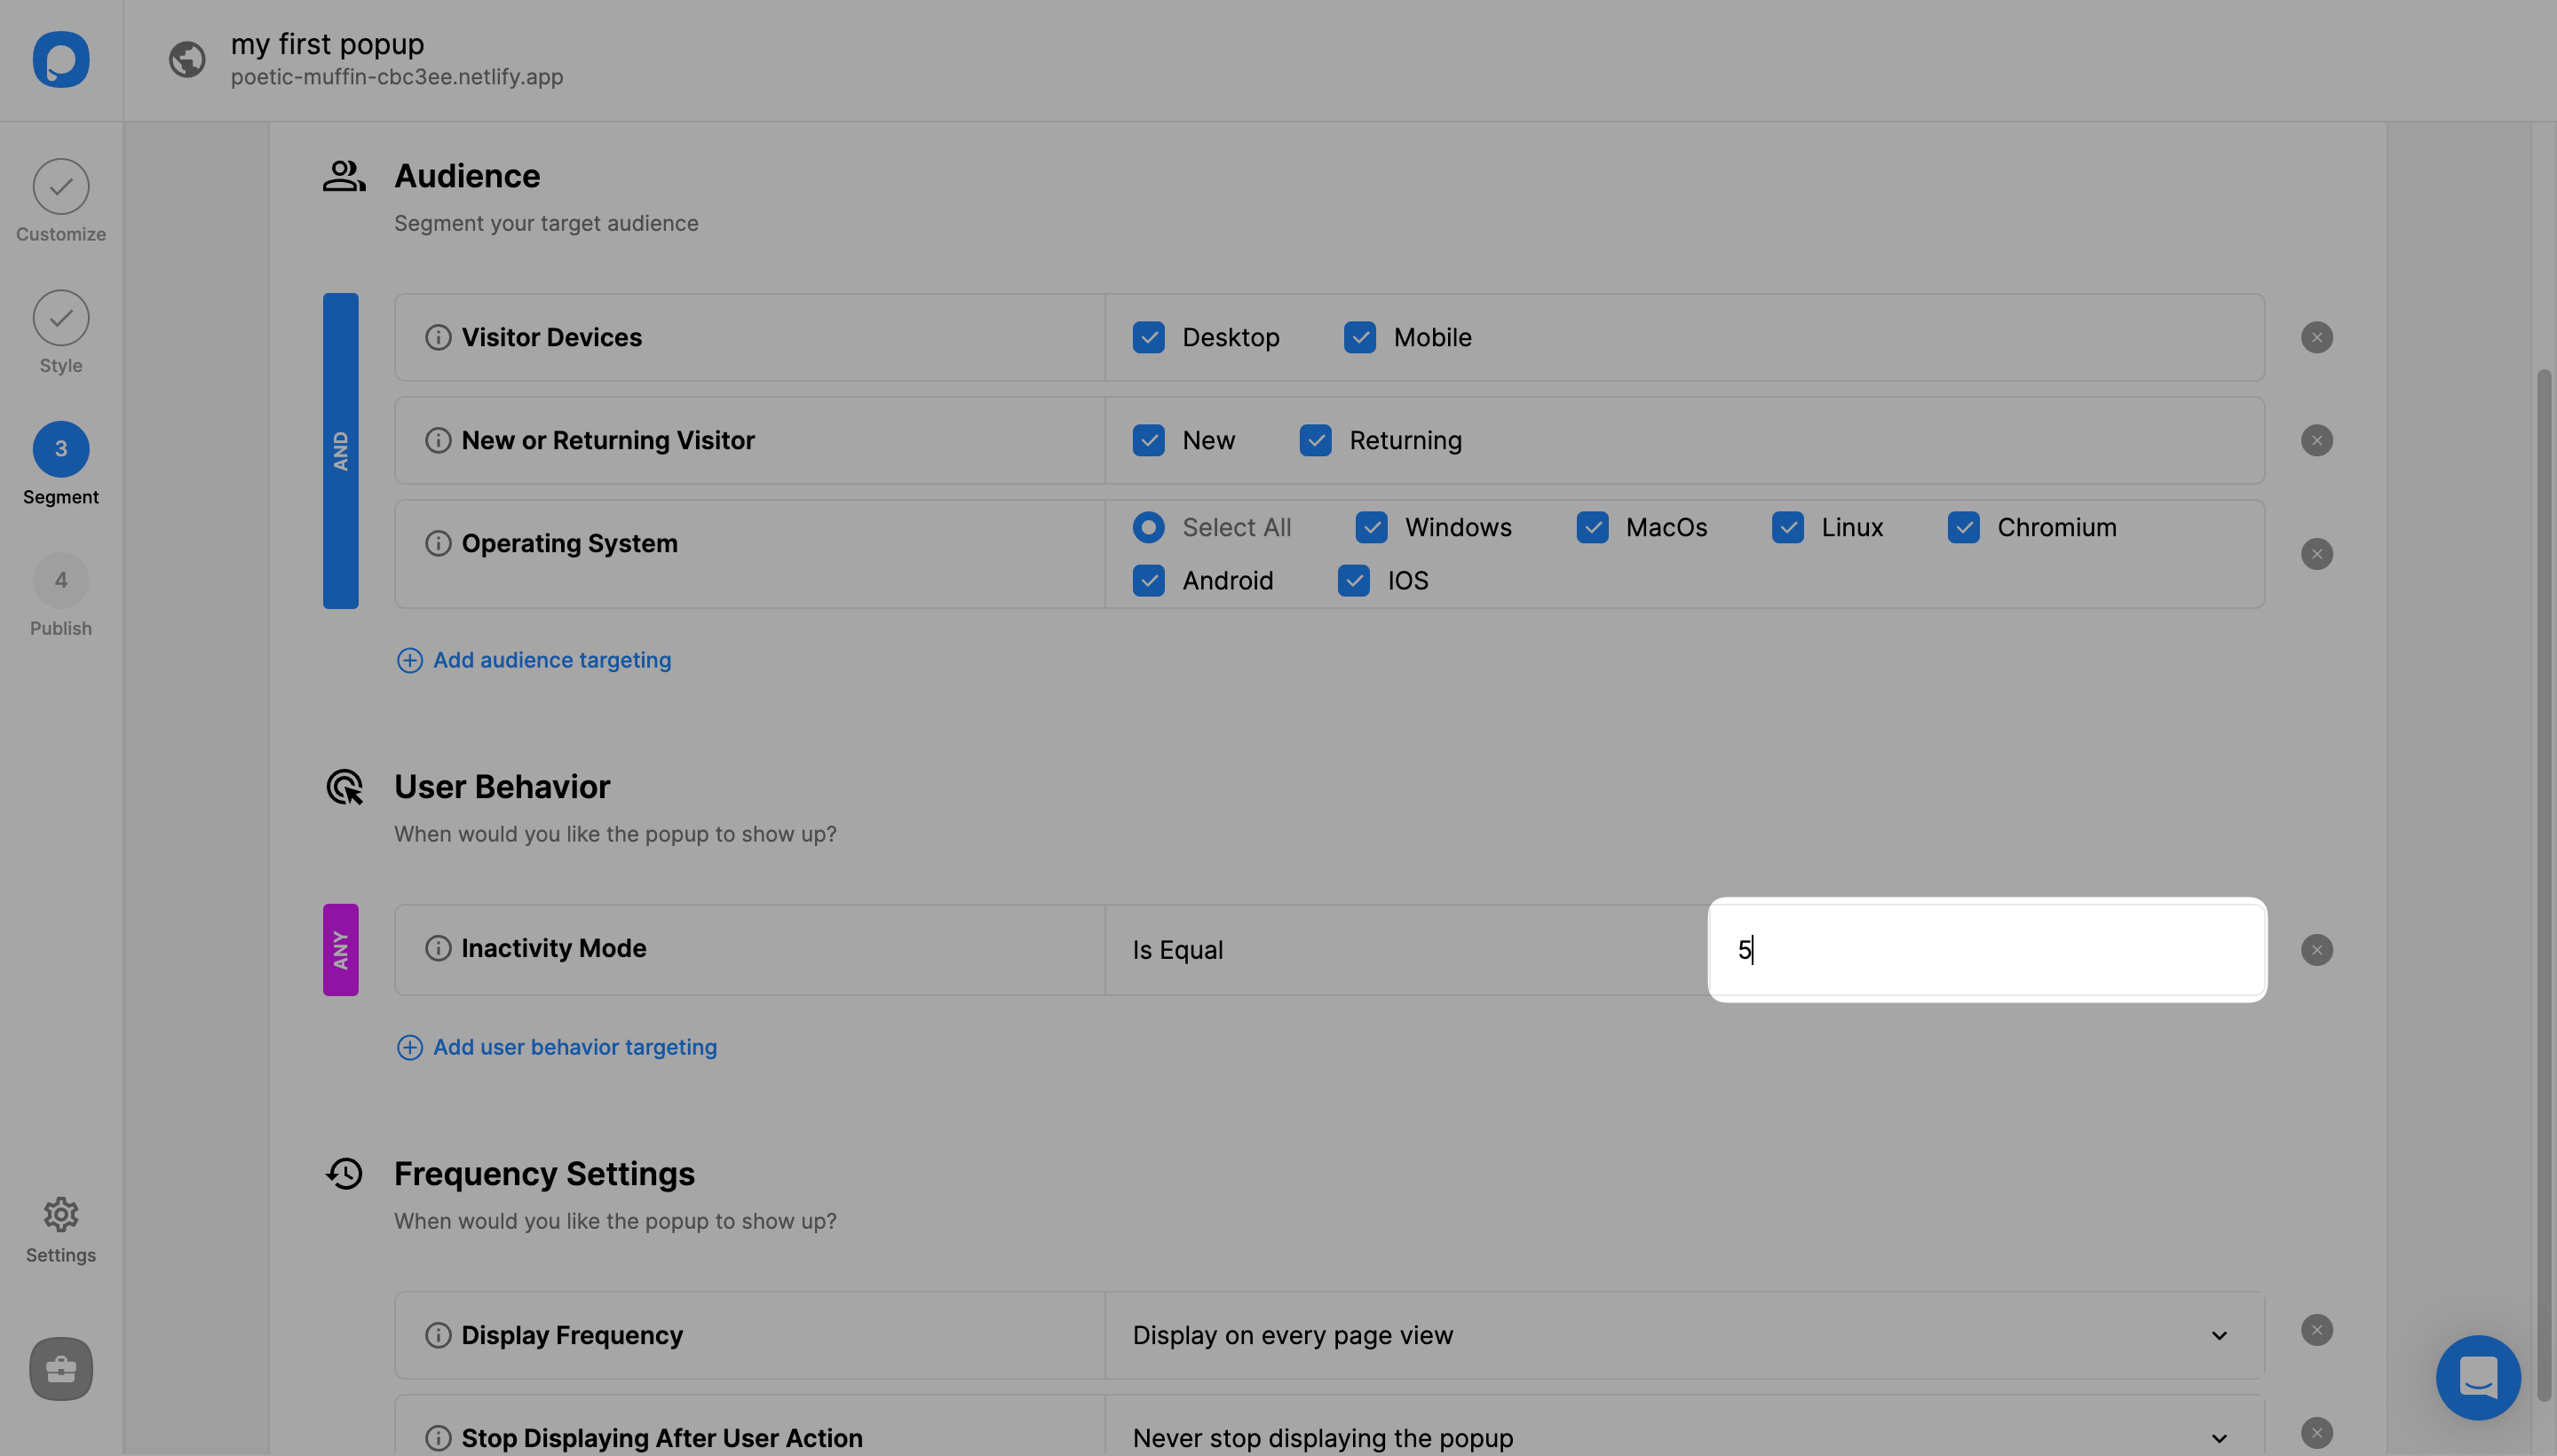 inactivity time input field